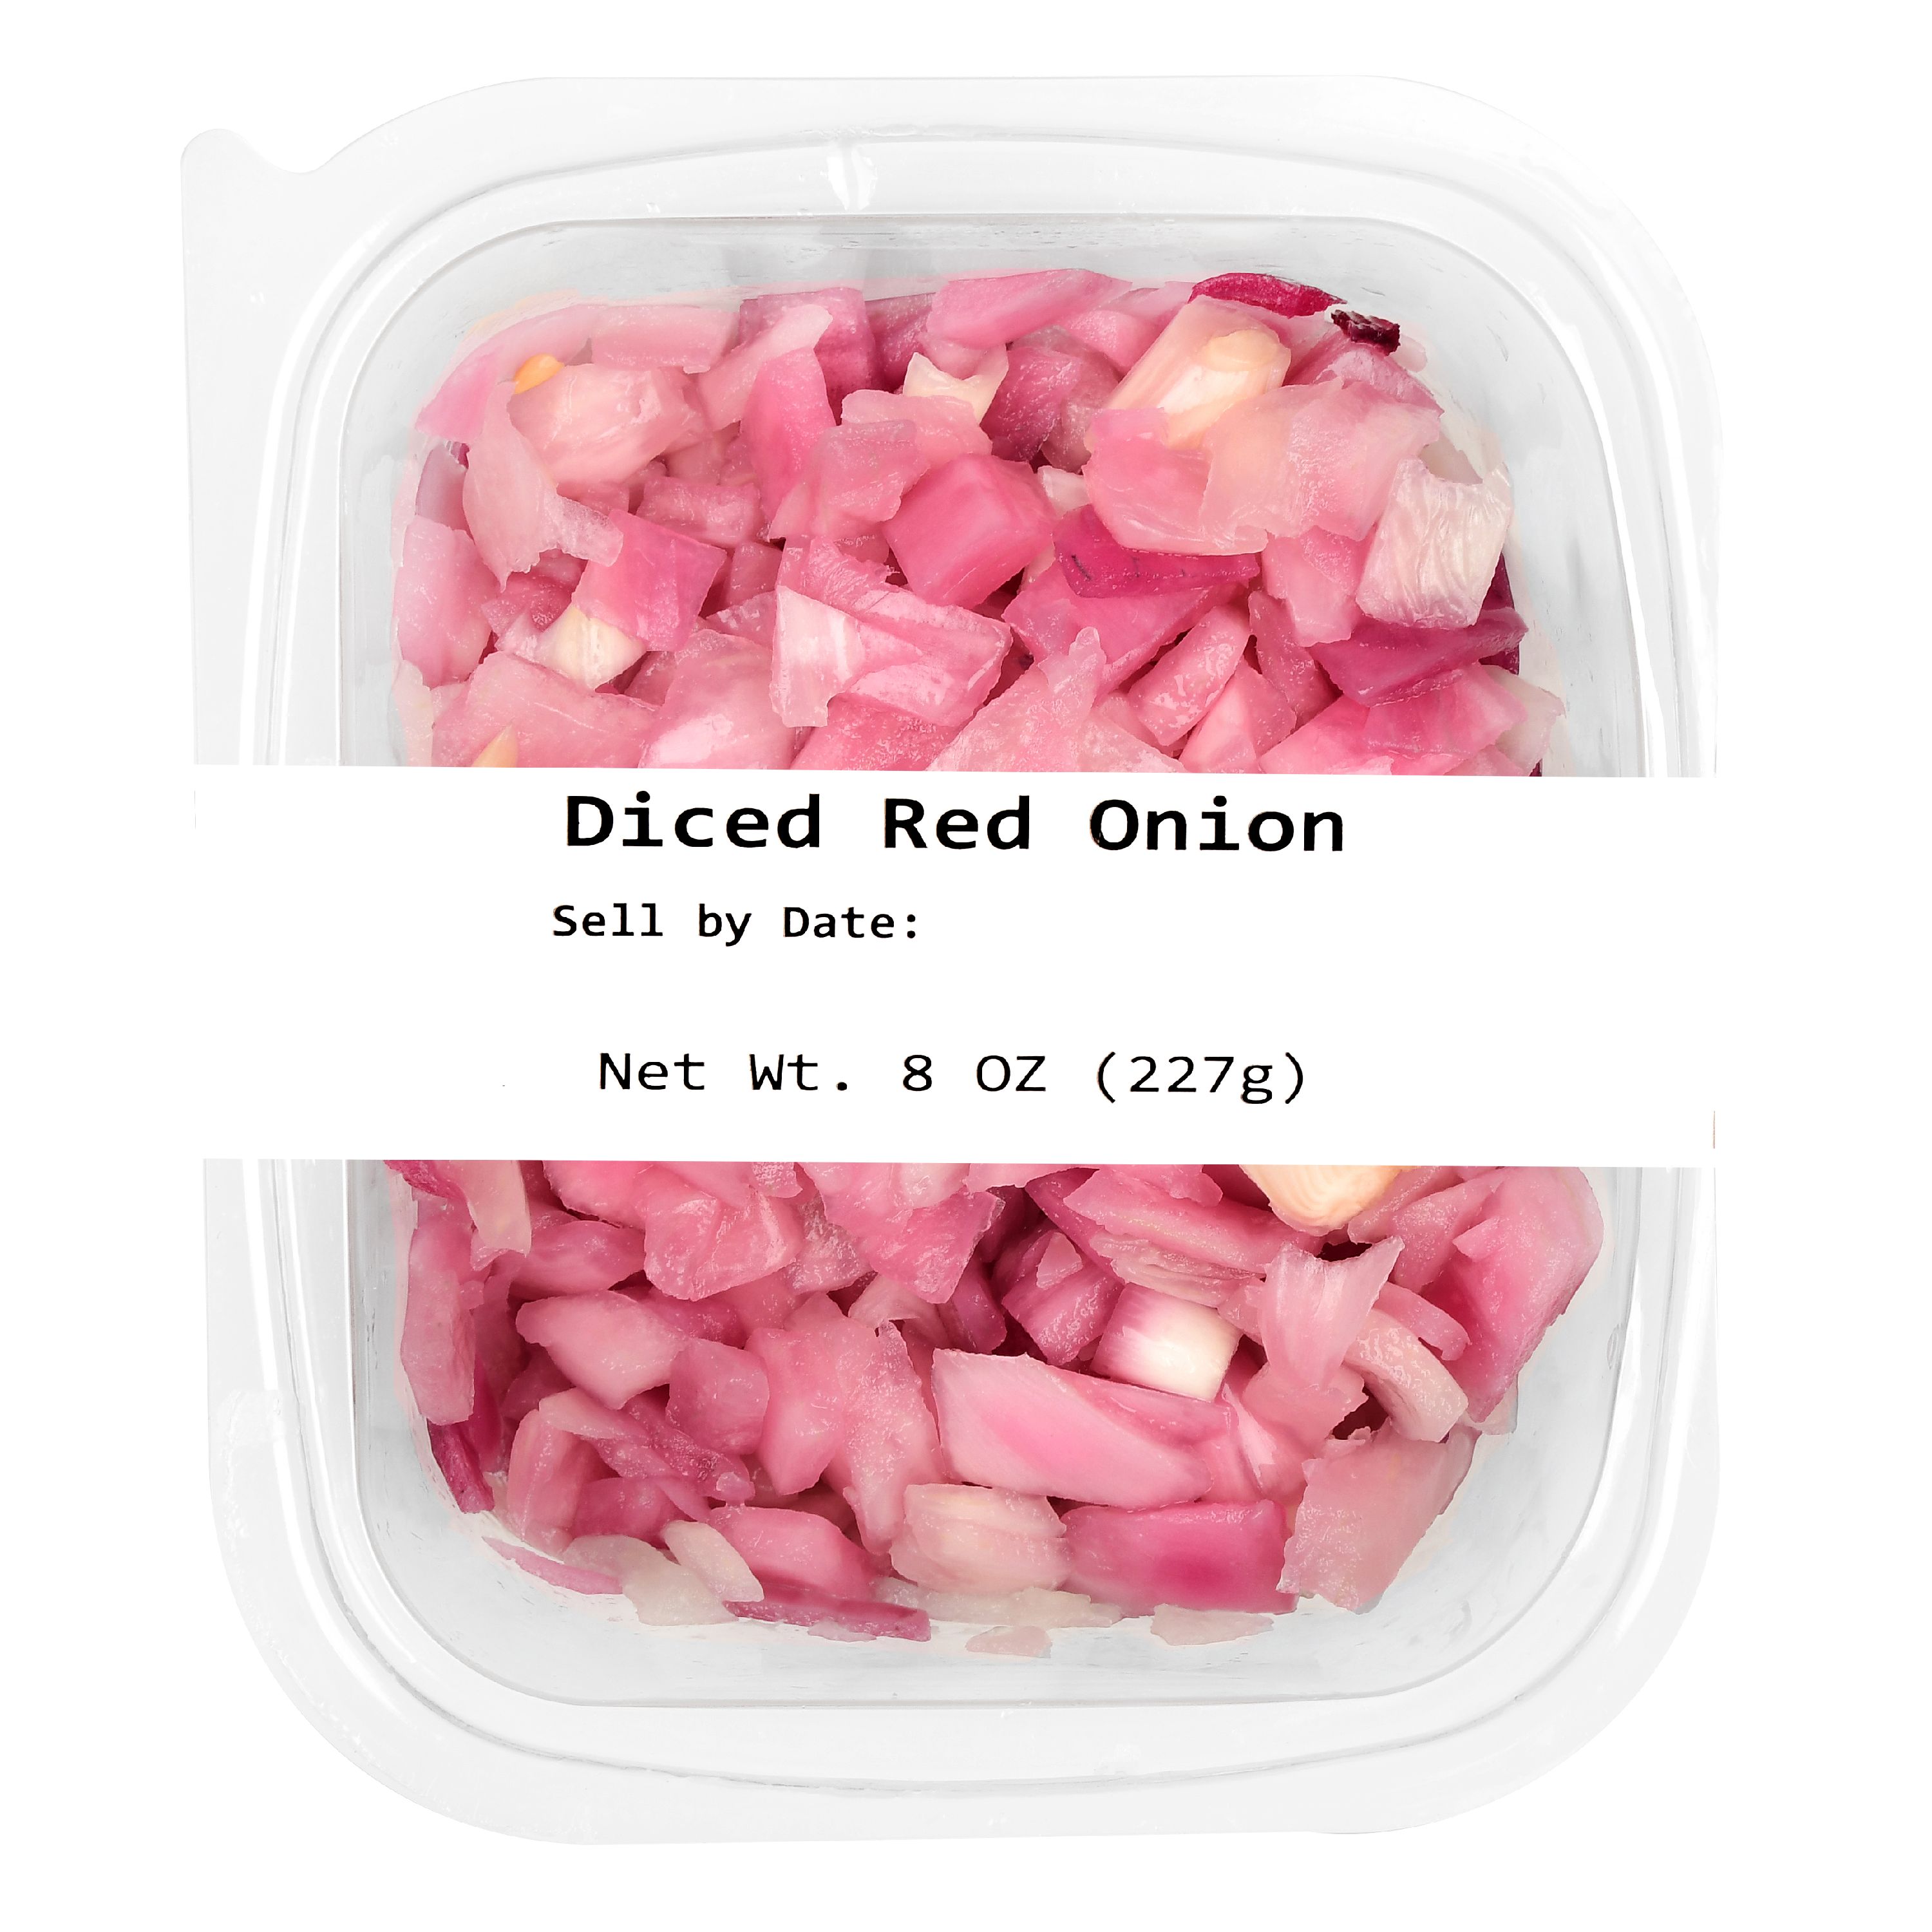 Freshness Guaranteed Diced Red Onions, 8 oz - image 1 of 5